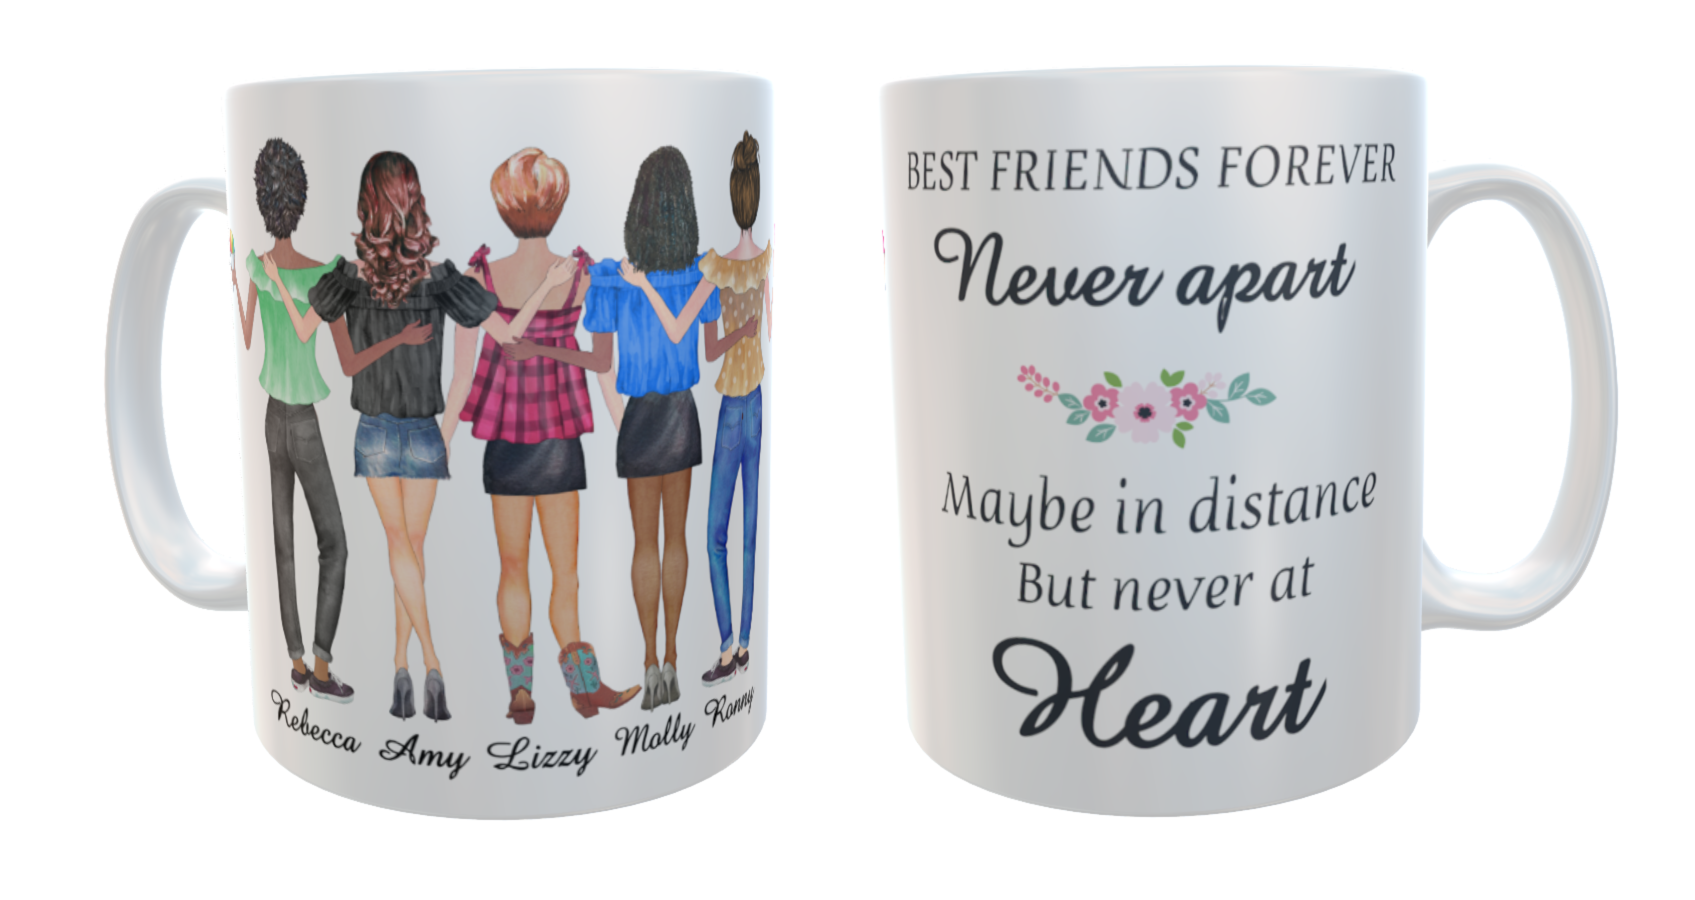 Summer Days Best Friends Forever Mug Custom Best Friends Mug 5sumfrienmug 10 00 Dads Cabin For Sisters Mugs Best Friends Mugs And Personalised Printing Custom Printed Just For You